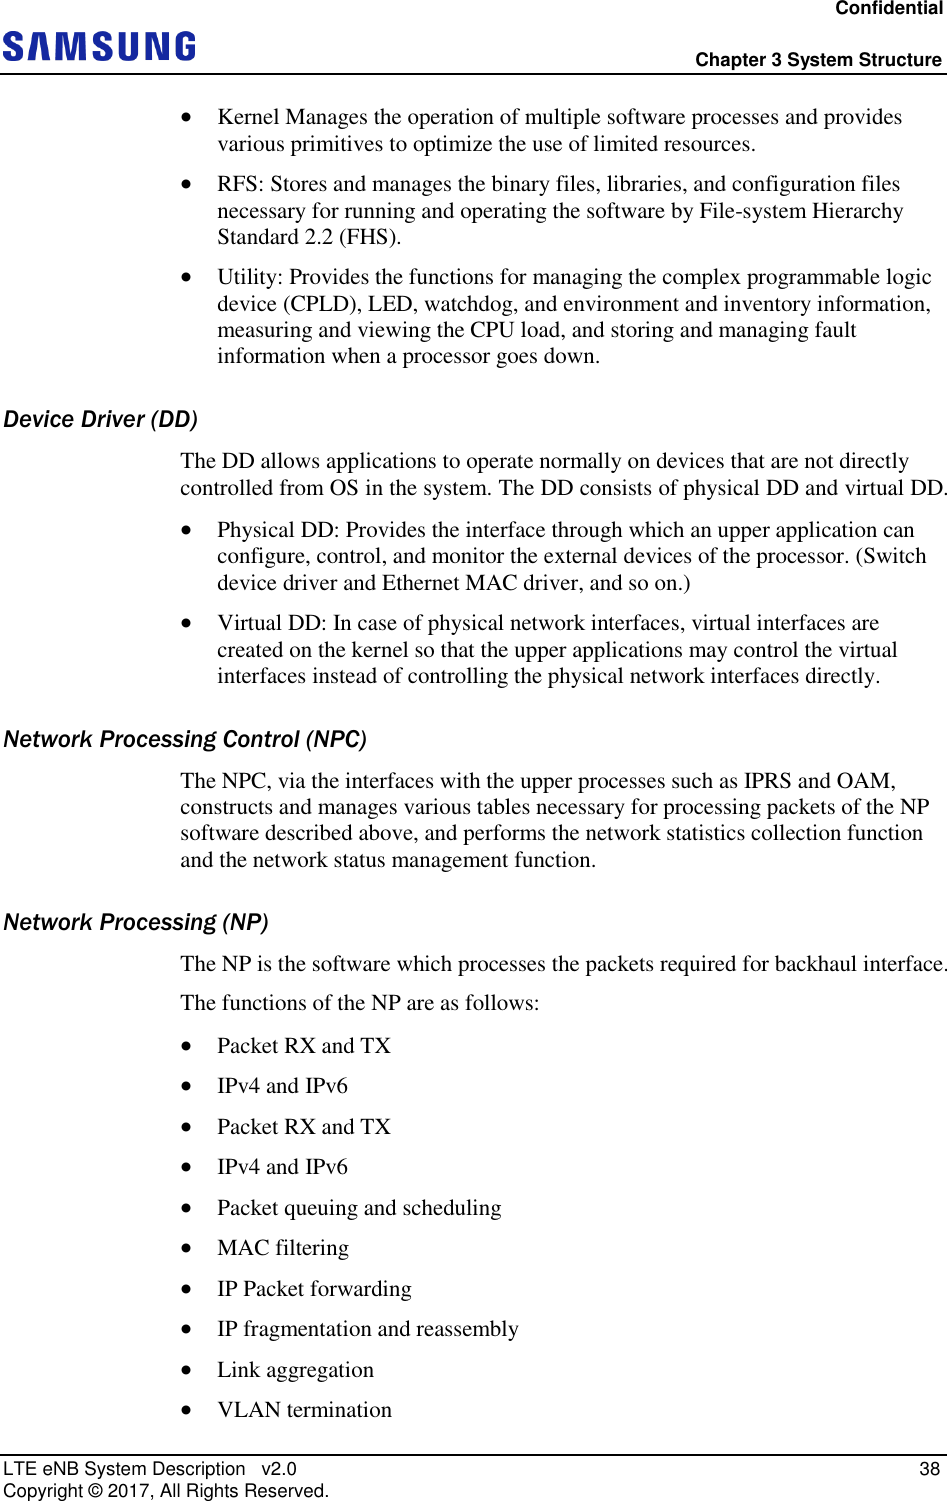 Confidential  Chapter 3 System Structure LTE eNB System Description   v2.0   38 Copyright ©  2017, All Rights Reserved.  Kernel Manages the operation of multiple software processes and provides various primitives to optimize the use of limited resources.  RFS: Stores and manages the binary files, libraries, and configuration files necessary for running and operating the software by File-system Hierarchy Standard 2.2 (FHS).  Utility: Provides the functions for managing the complex programmable logic device (CPLD), LED, watchdog, and environment and inventory information, measuring and viewing the CPU load, and storing and managing fault information when a processor goes down. Device Driver (DD) The DD allows applications to operate normally on devices that are not directly controlled from OS in the system. The DD consists of physical DD and virtual DD.  Physical DD: Provides the interface through which an upper application can configure, control, and monitor the external devices of the processor. (Switch device driver and Ethernet MAC driver, and so on.)  Virtual DD: In case of physical network interfaces, virtual interfaces are created on the kernel so that the upper applications may control the virtual interfaces instead of controlling the physical network interfaces directly. Network Processing Control (NPC) The NPC, via the interfaces with the upper processes such as IPRS and OAM, constructs and manages various tables necessary for processing packets of the NP software described above, and performs the network statistics collection function and the network status management function. Network Processing (NP) The NP is the software which processes the packets required for backhaul interface. The functions of the NP are as follows:  Packet RX and TX  IPv4 and IPv6  Packet RX and TX  IPv4 and IPv6  Packet queuing and scheduling  MAC filtering  IP Packet forwarding  IP fragmentation and reassembly  Link aggregation  VLAN termination 